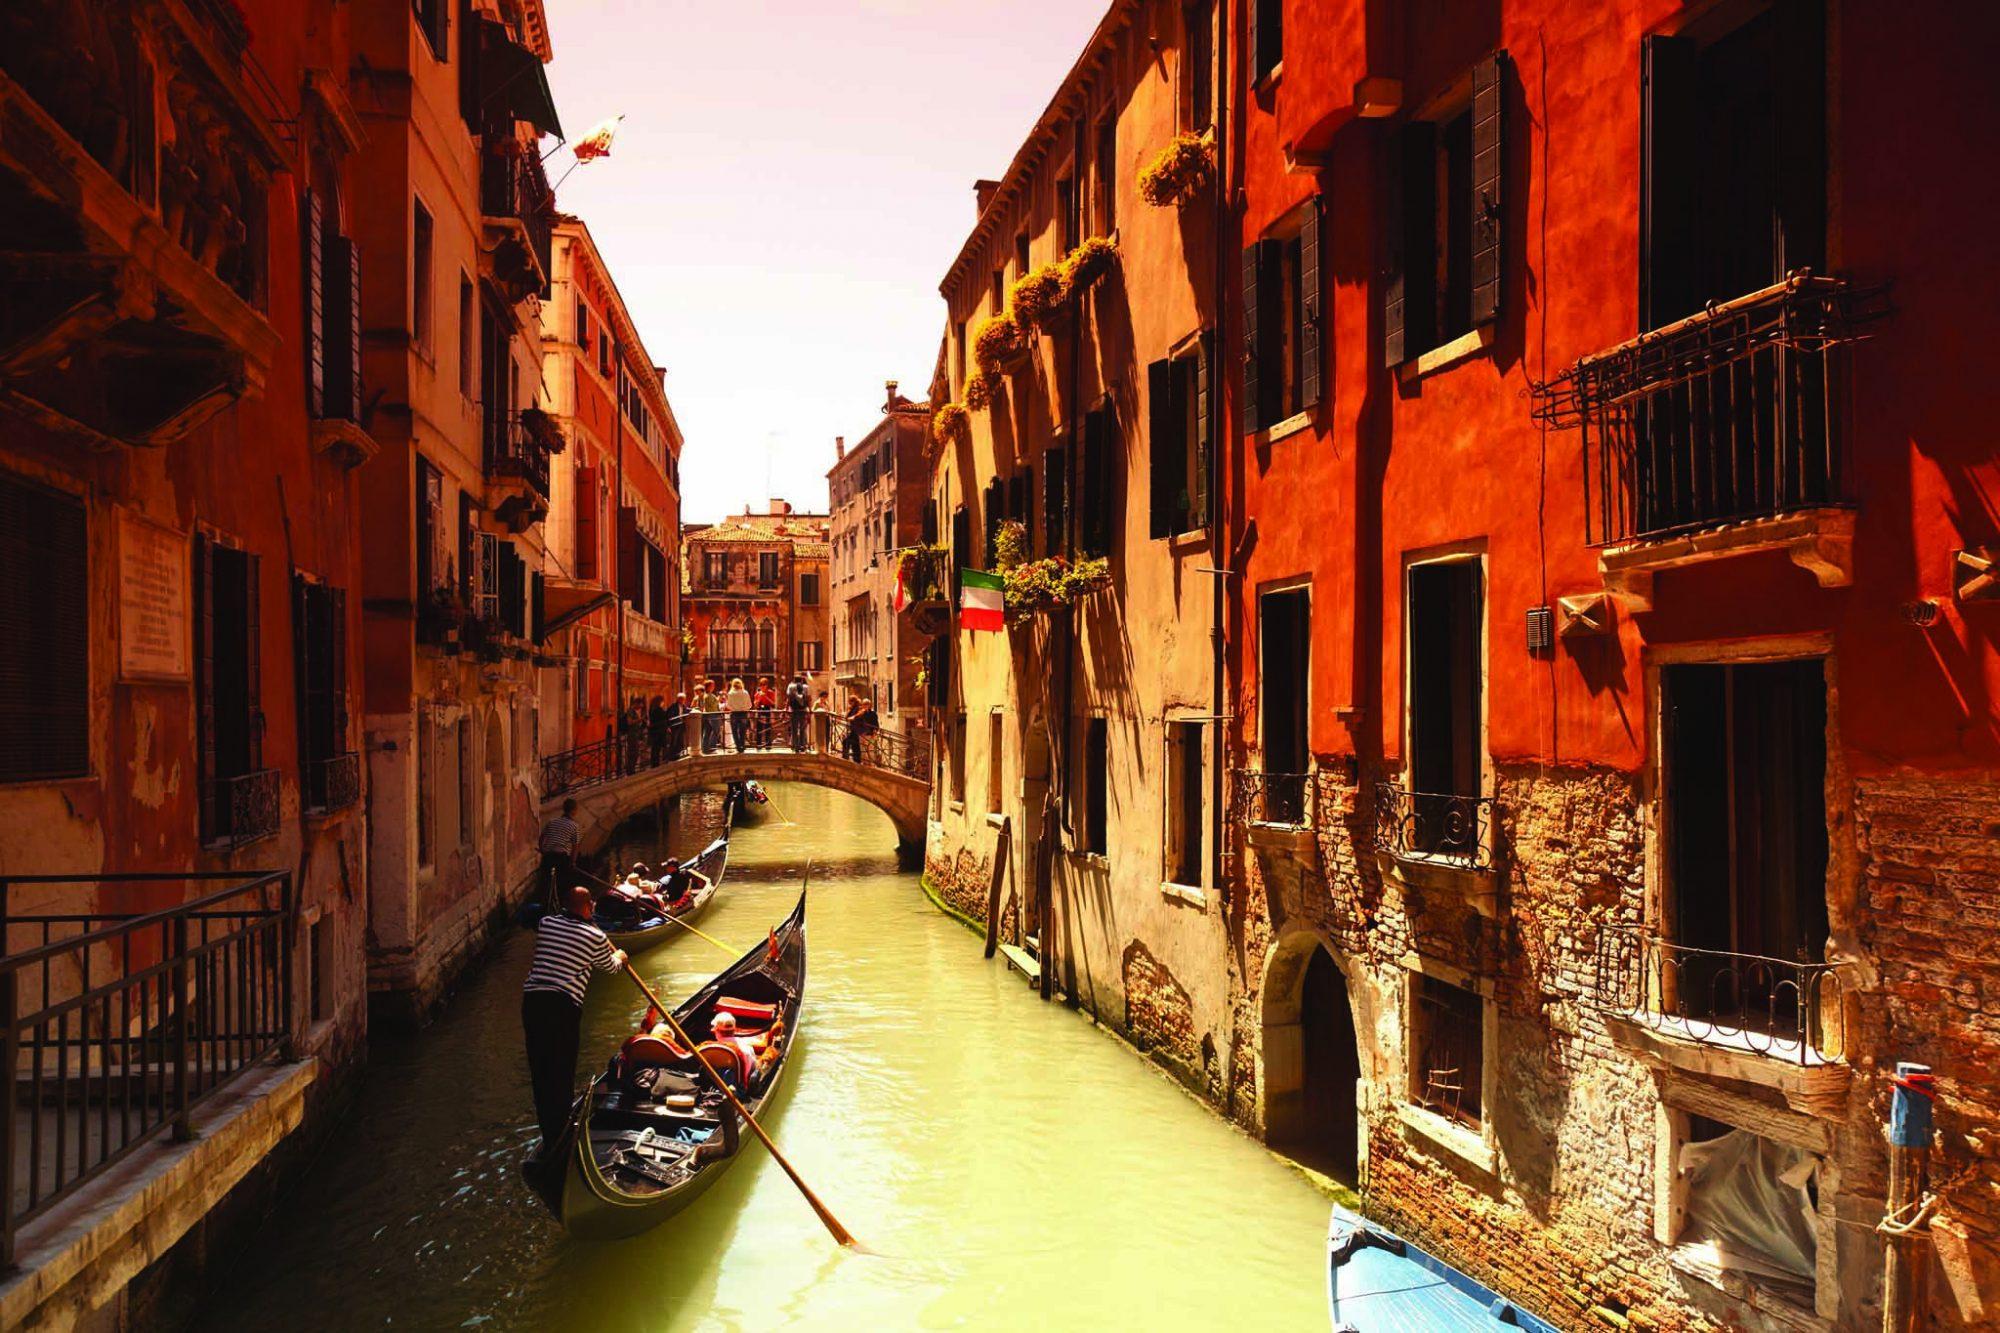 Welcome-Fall-Winter-2021-rick-steves-venice-italy